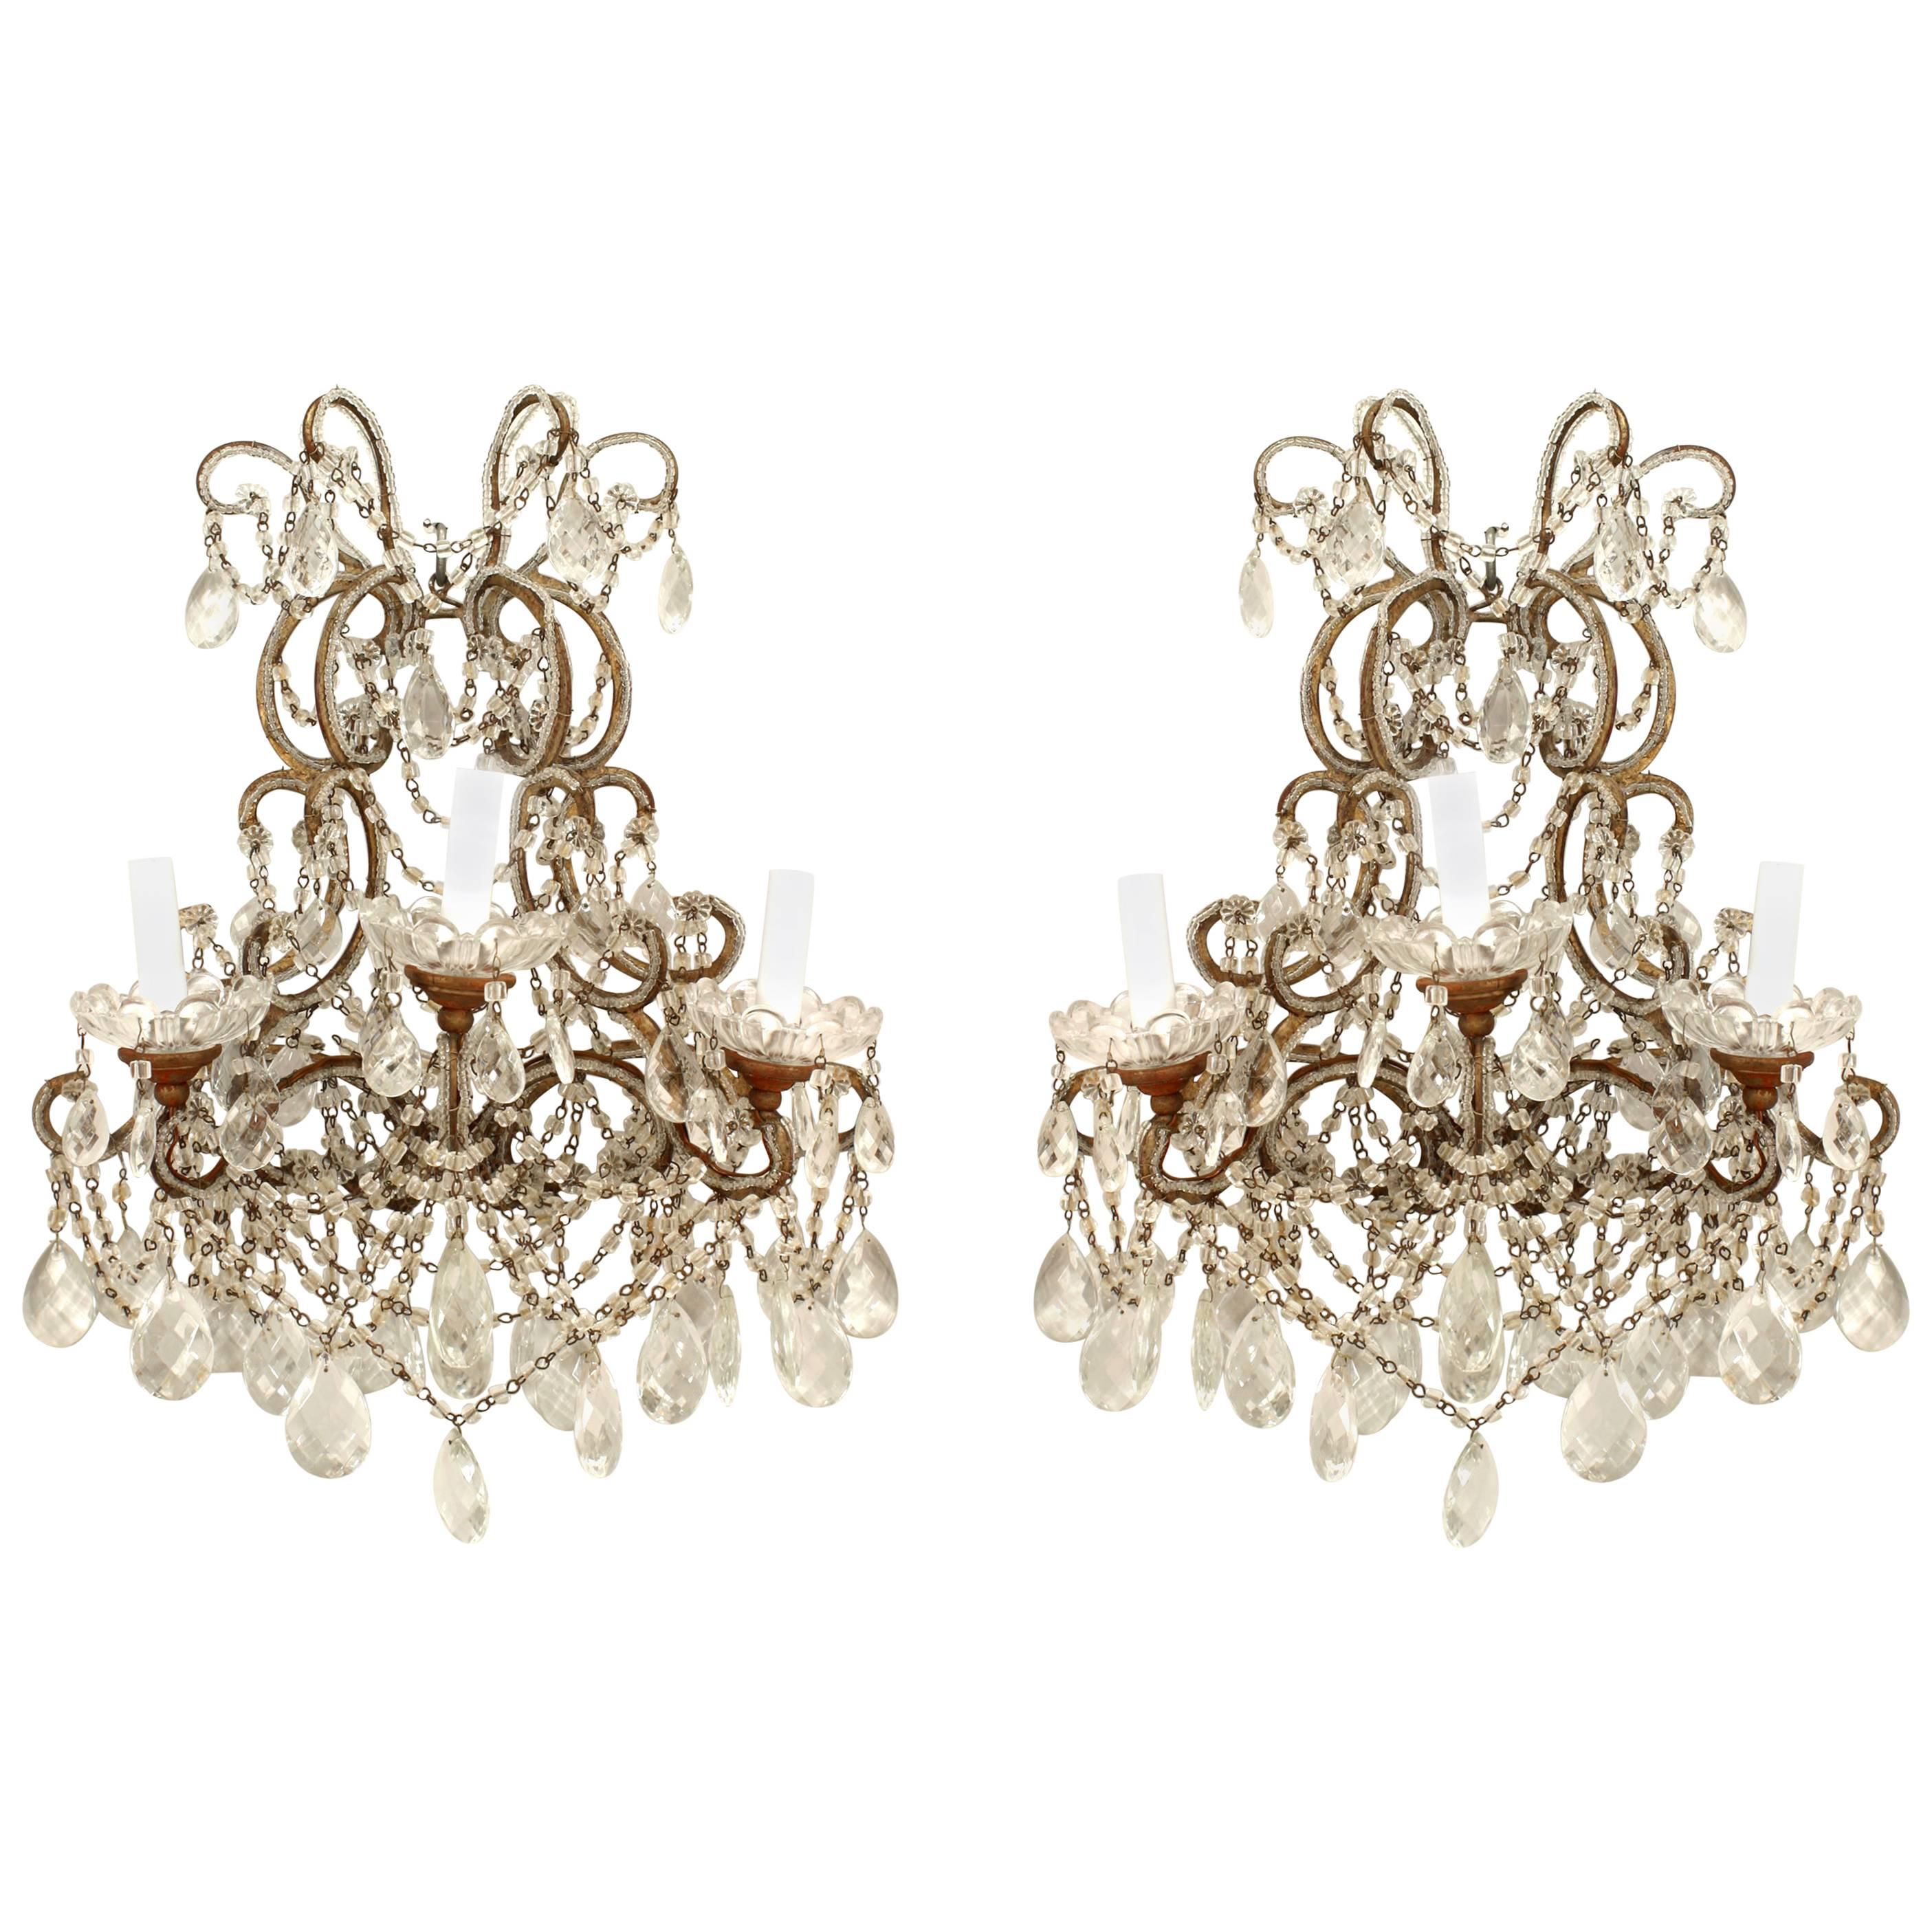 Pair of Venetian Style Metal Scroll & Crystal Wall Sconces Maison Bagues Mannner For Sale